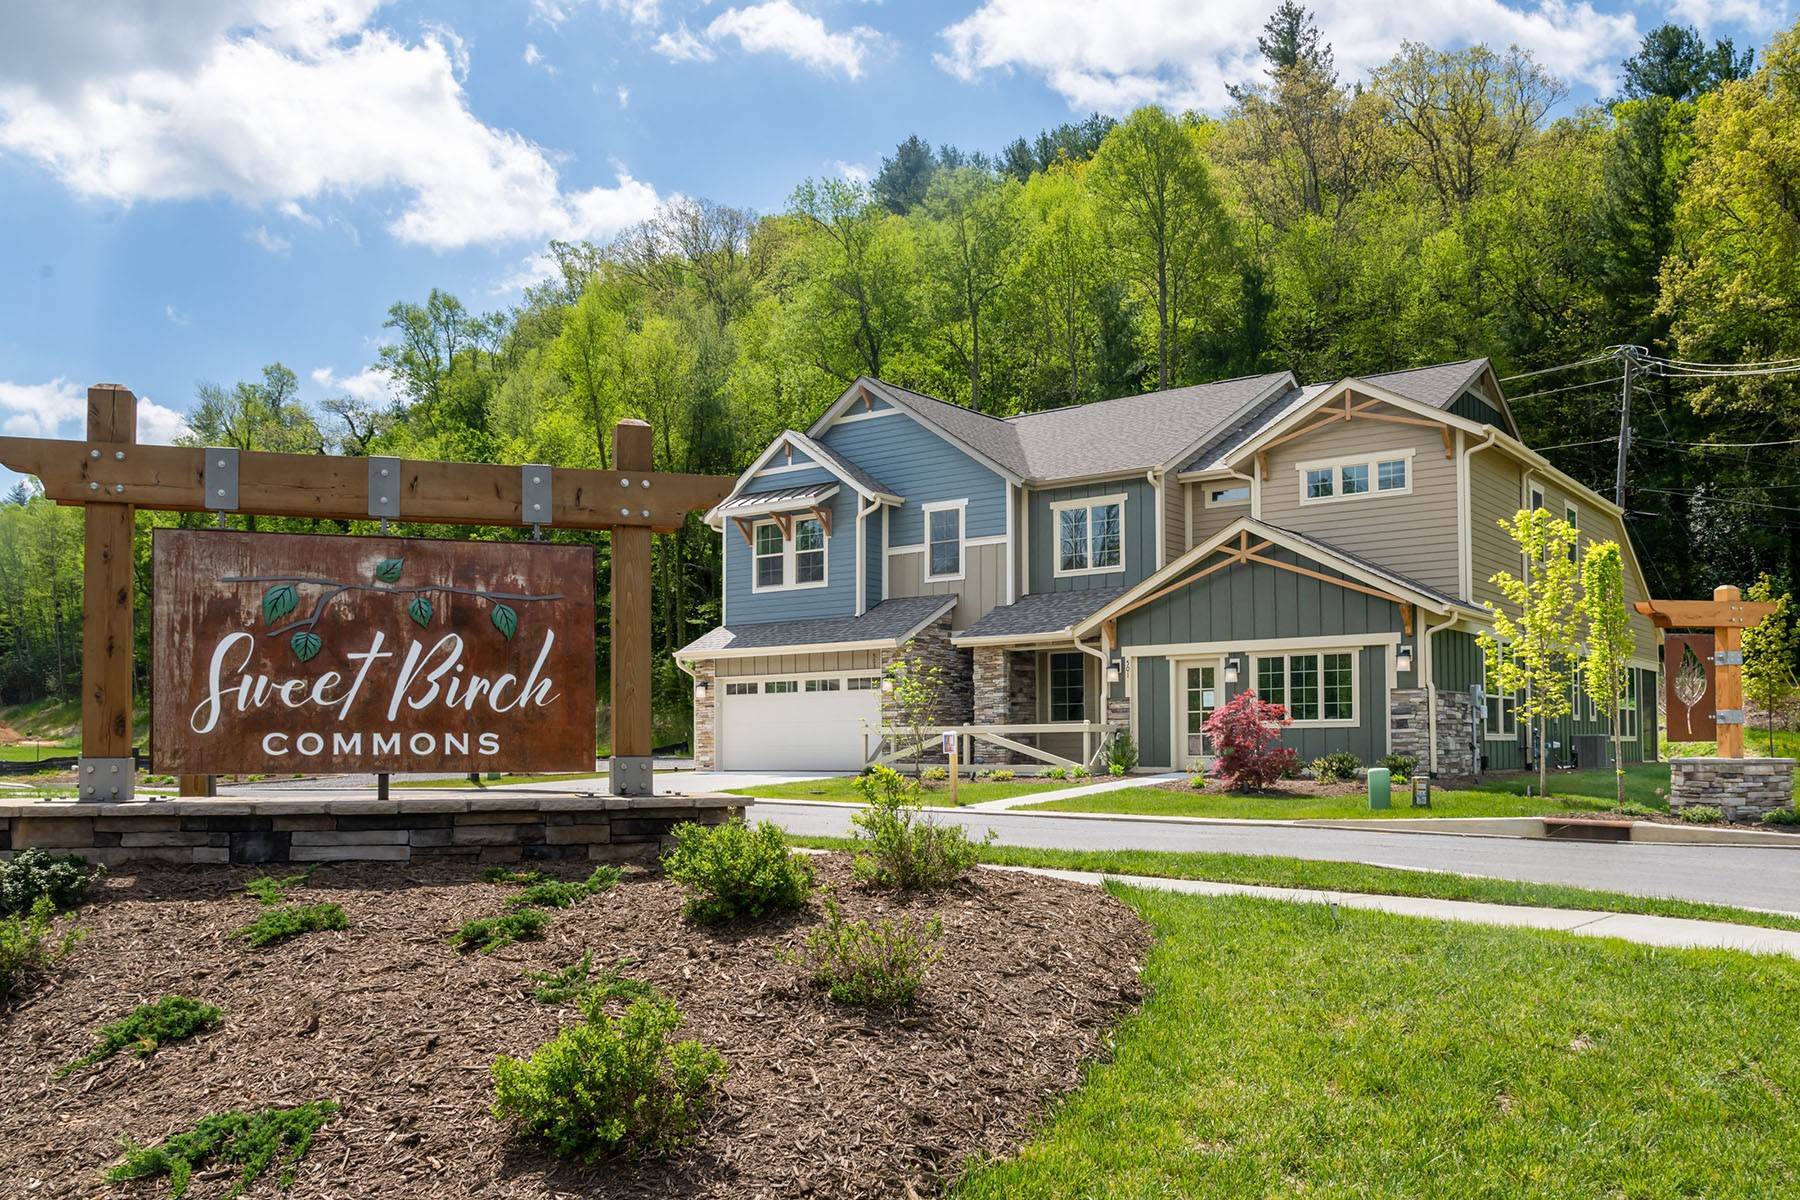 Condominiums for Sale at Sweet Birch Commons 572 Sweet Birch Park Lane Black Mountain, North Carolina 28711 United States